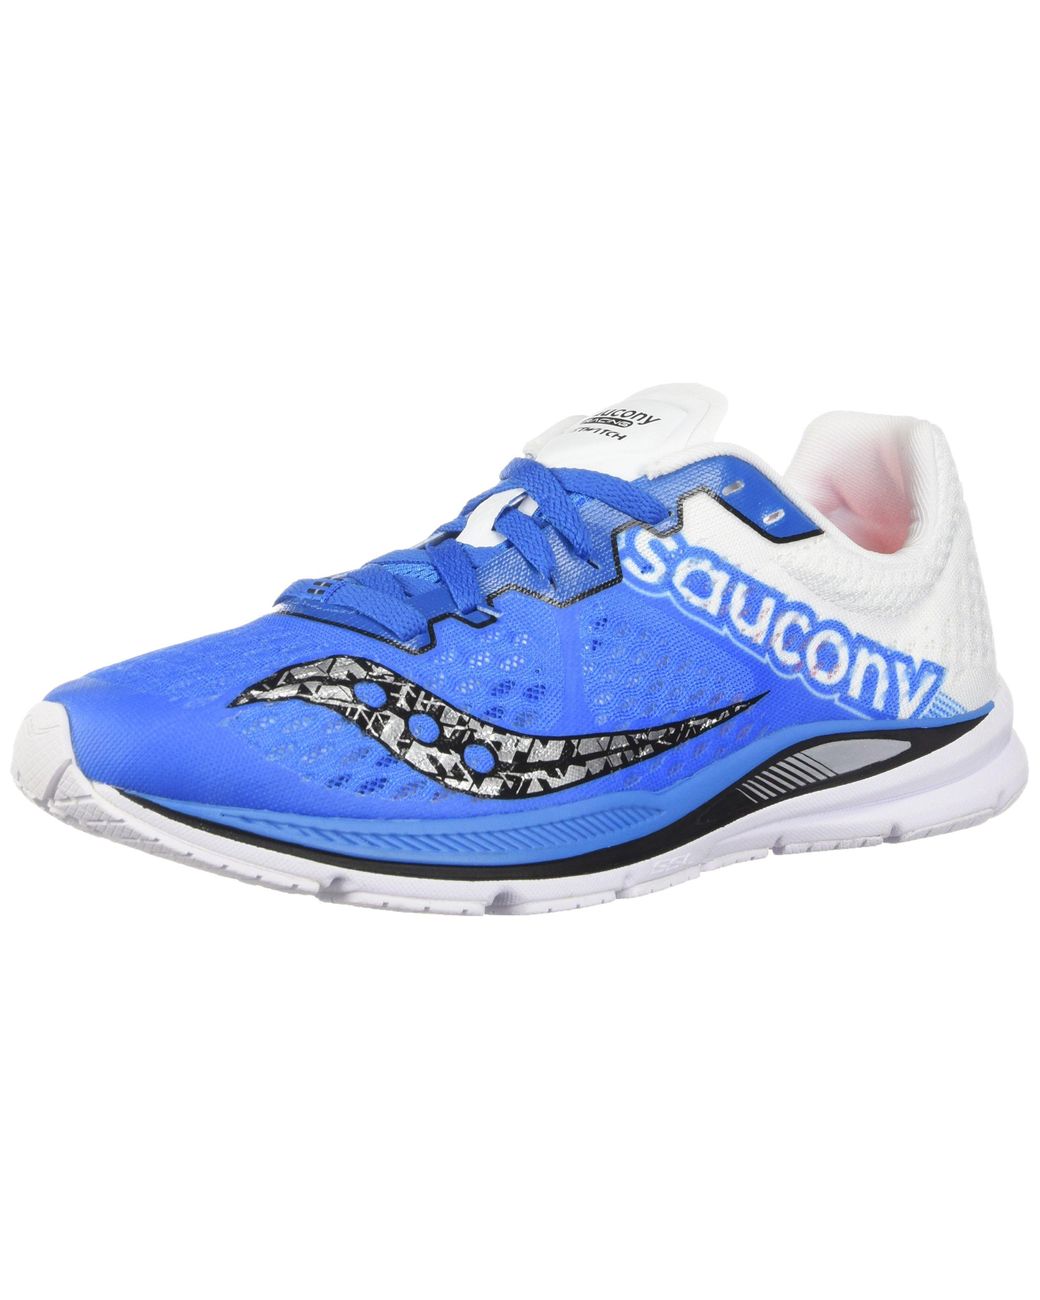 saucony fastwitch 8 mens gold